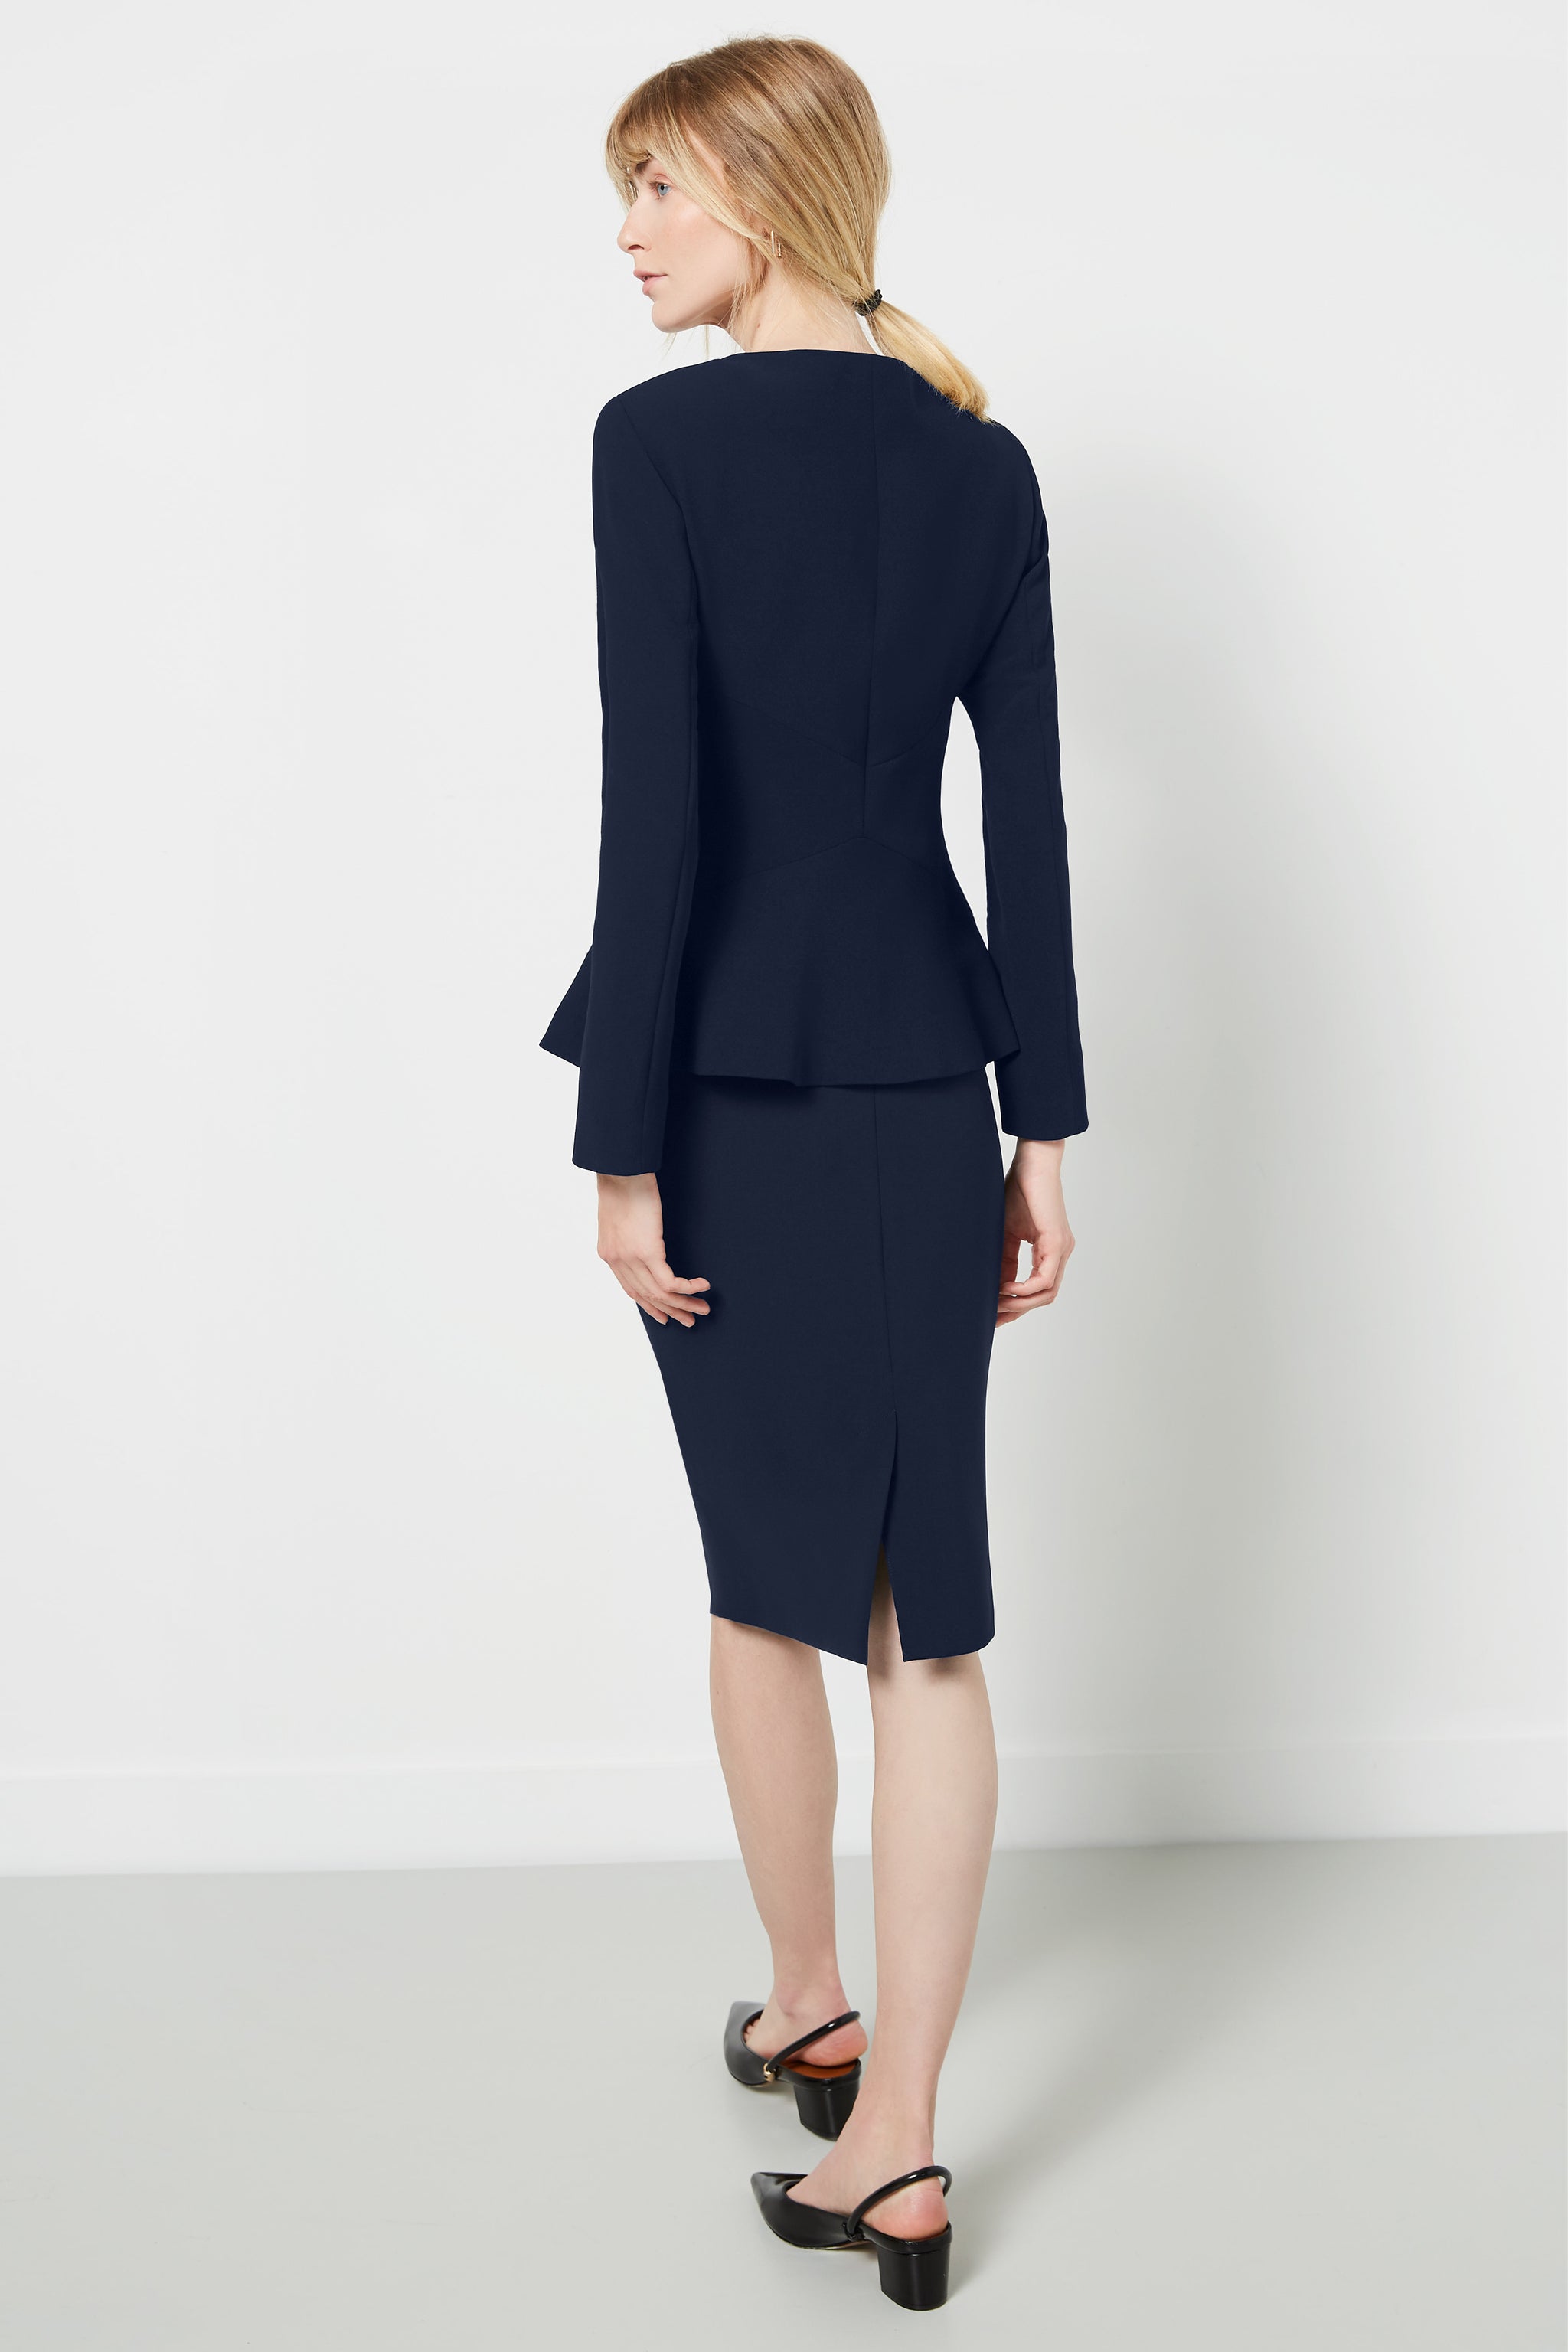 Suzy Navy Suiting Skirt